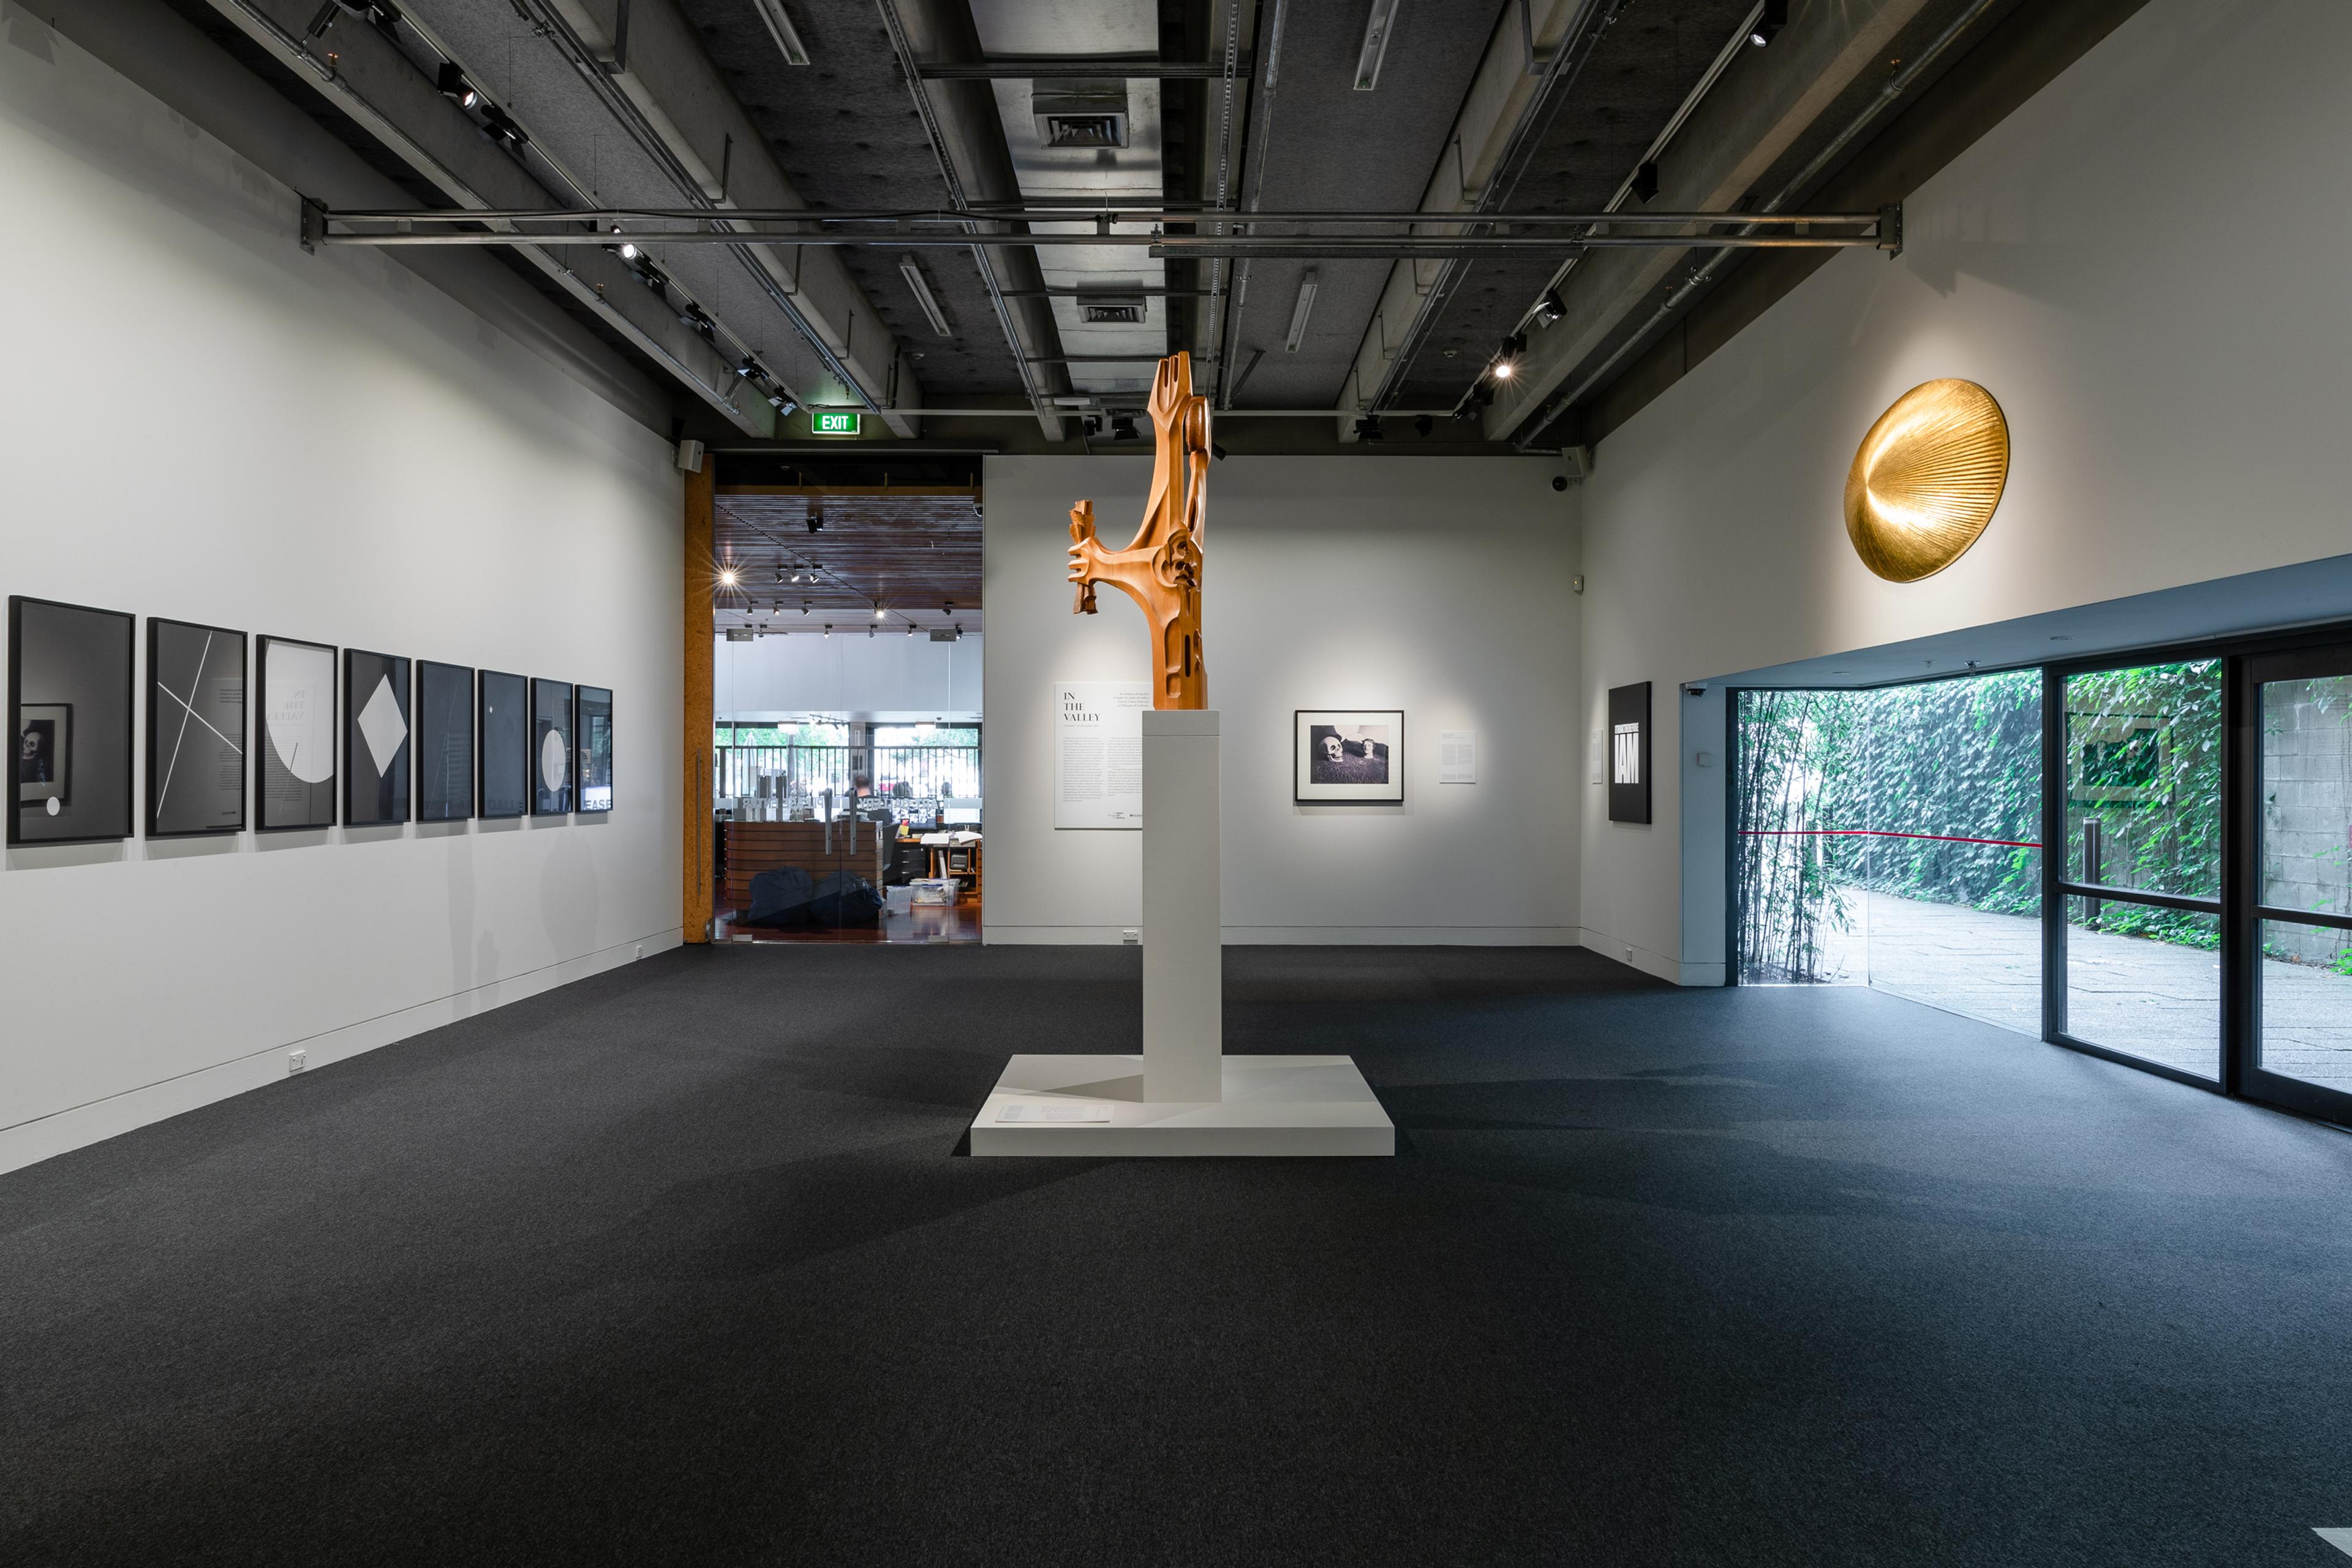 Installation view of 'In the Valley' an exhibition